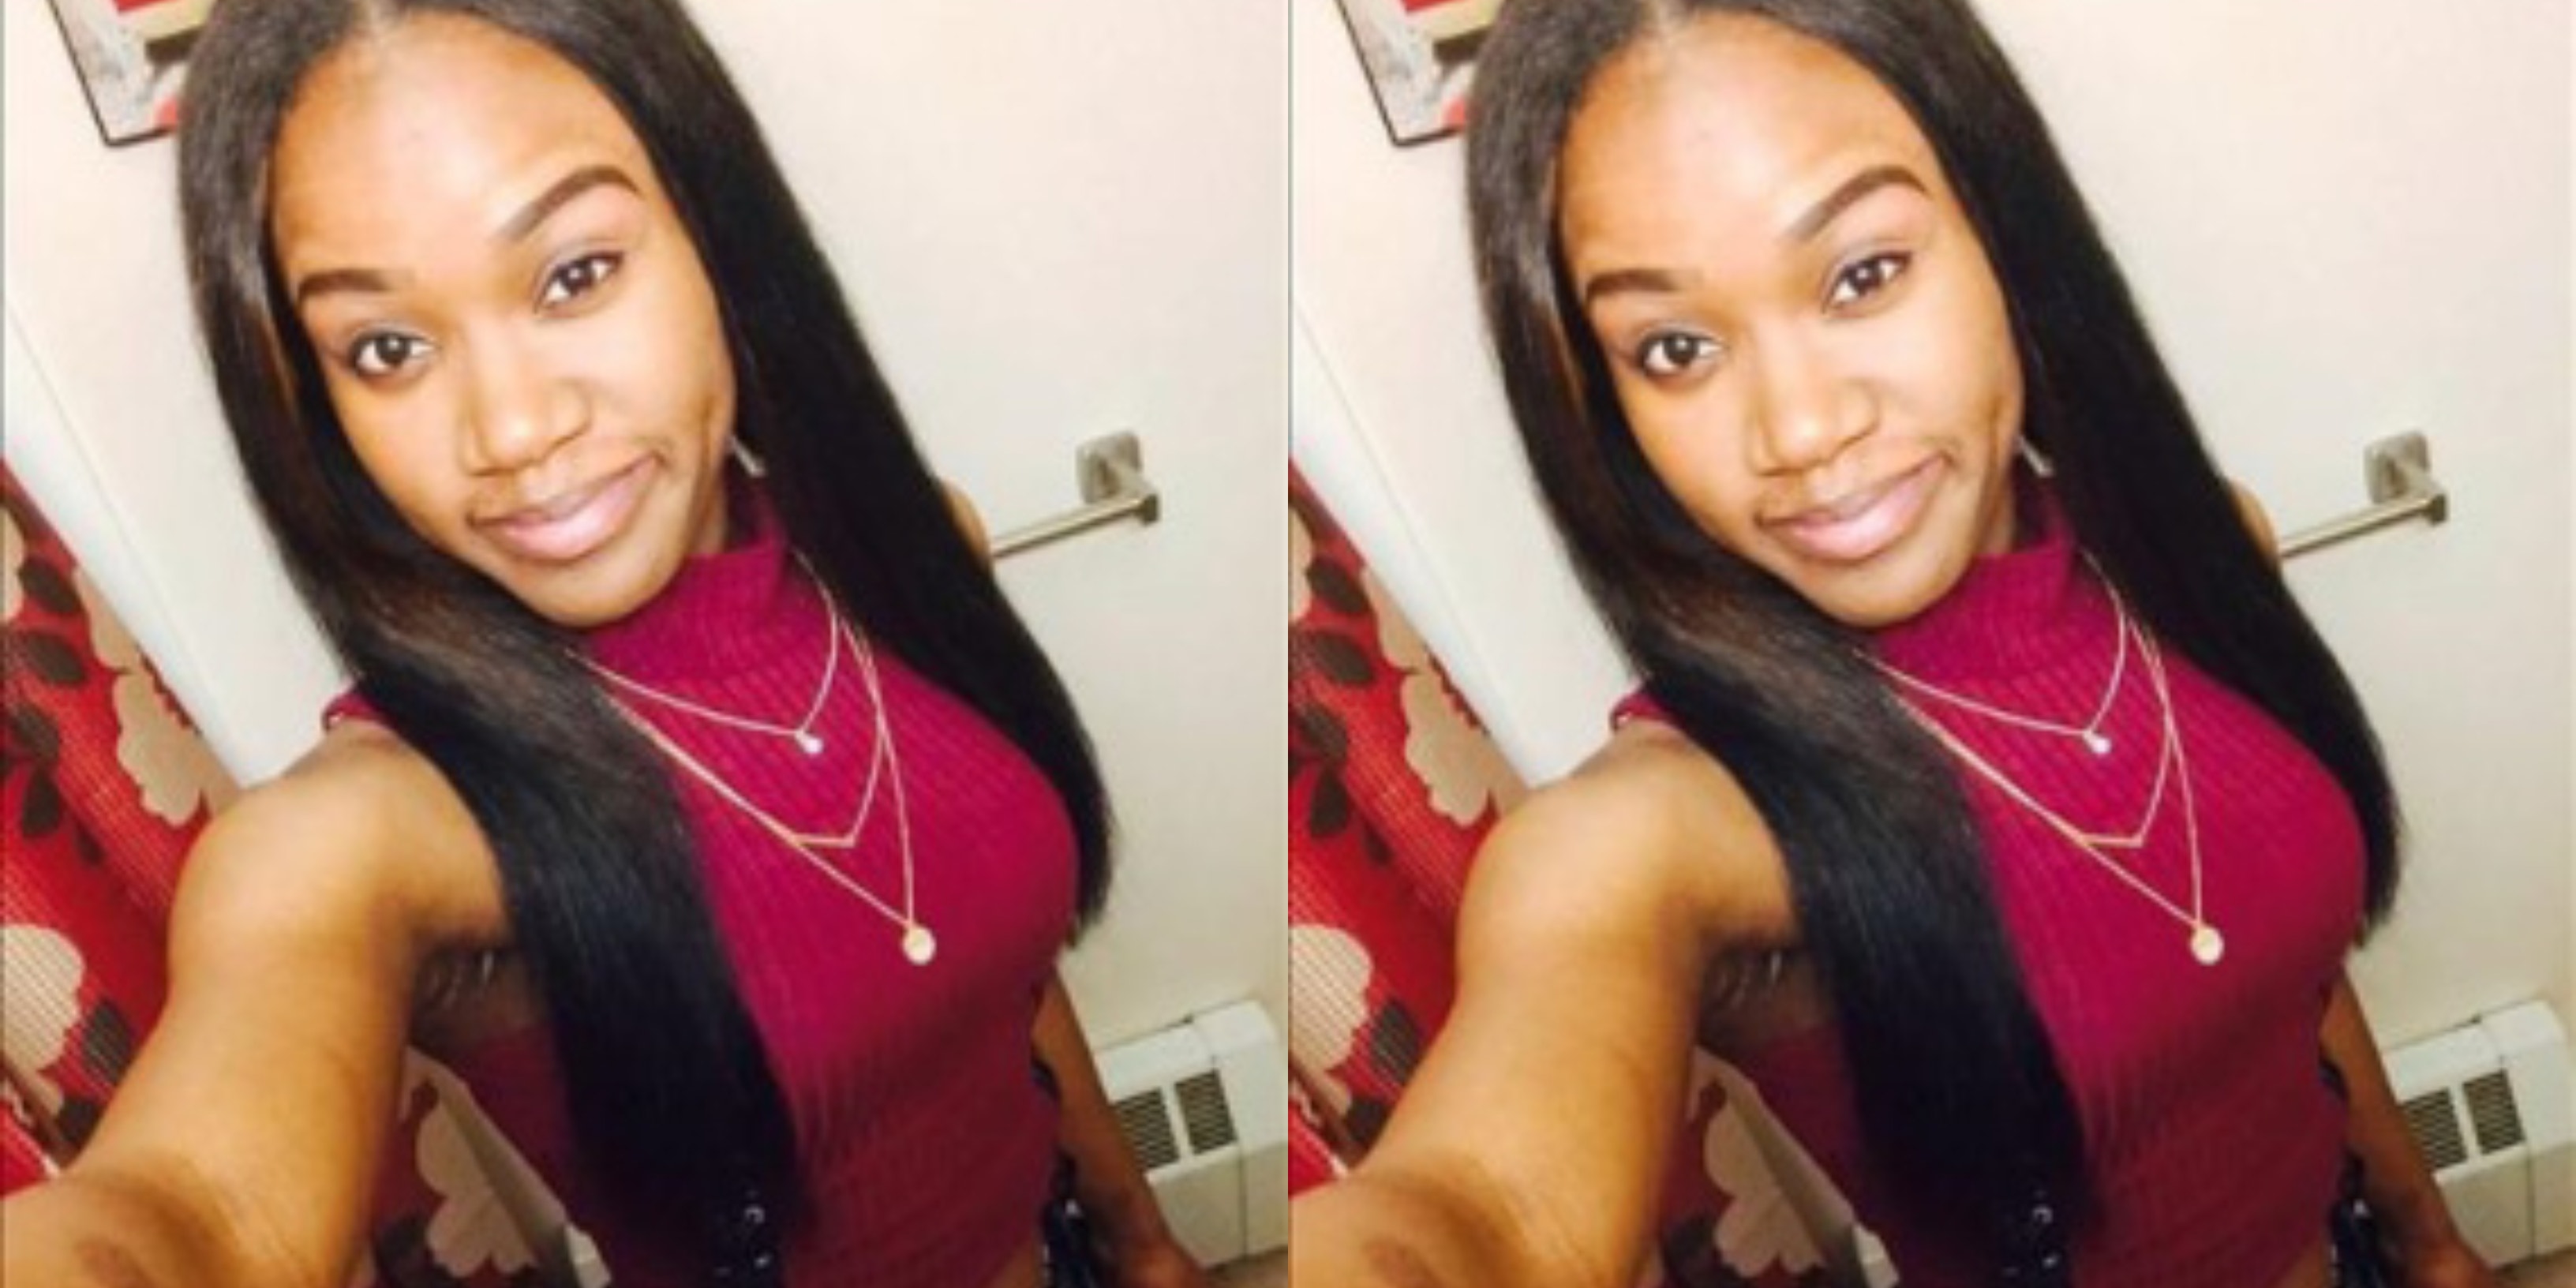 What Happened To Kierra Coles? Details Chicago Pregnant Woman Postal Worker Missing Three Weeks